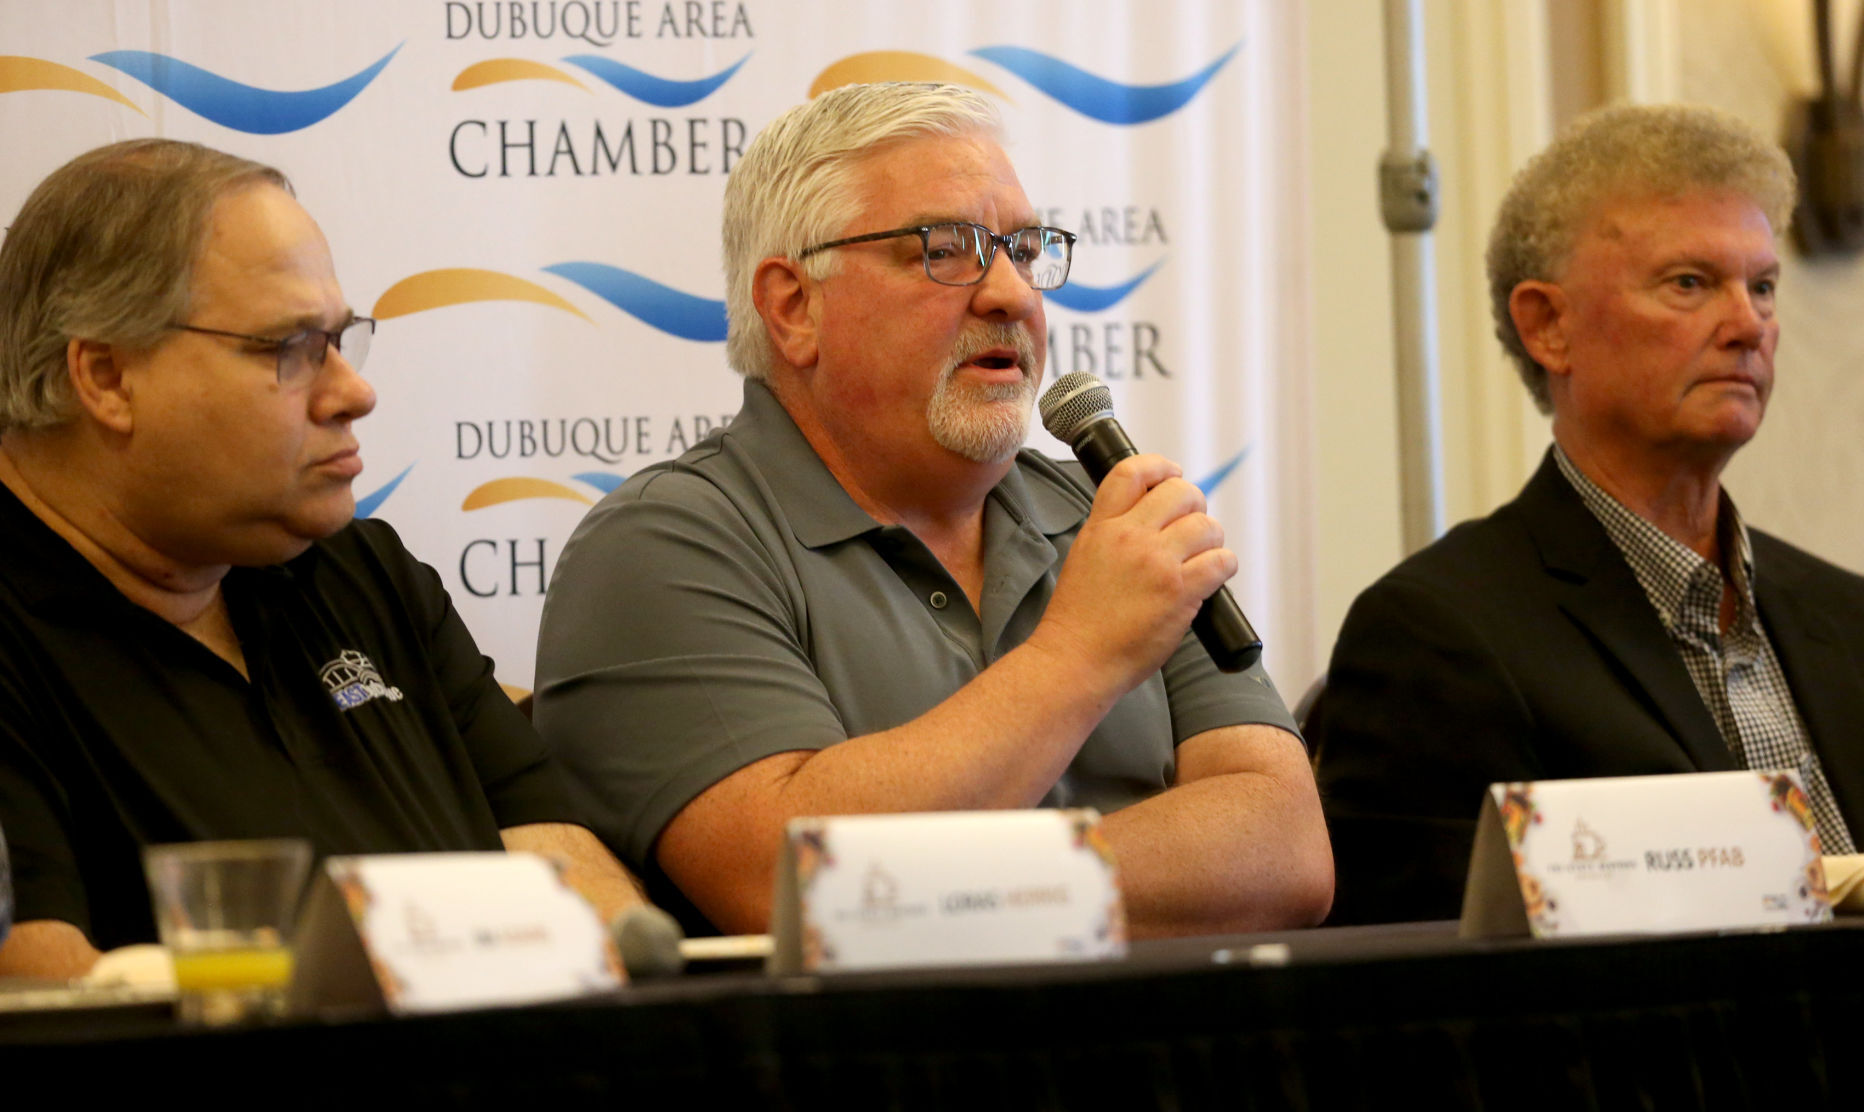 Peosta, Iowa, Mayor Russ Pfab speaks during the Dubuque Area Chamber of Commerce